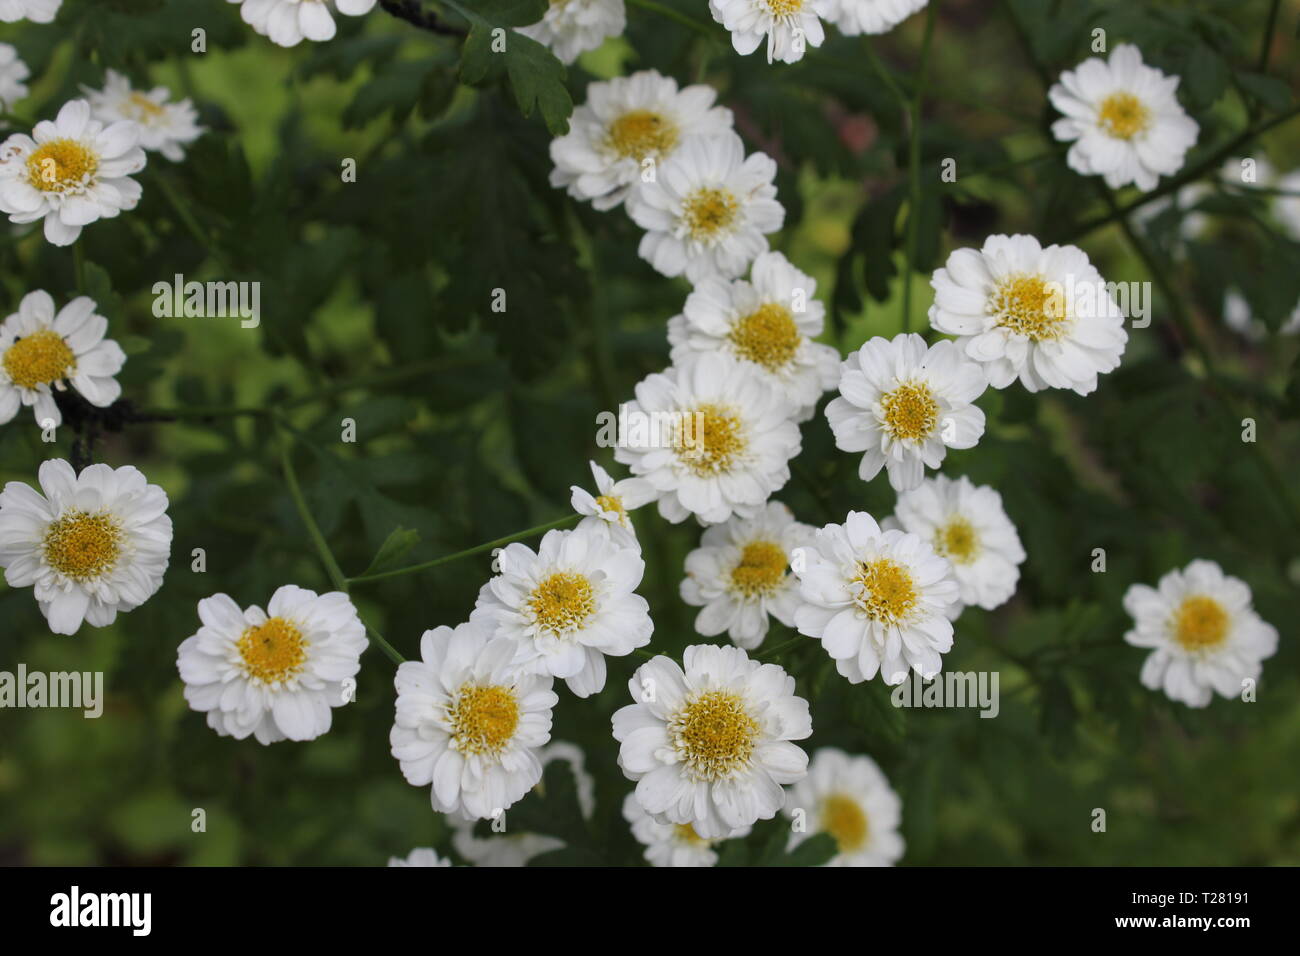 Small White Flowers With Yellow Centre Garden Plant Stock Photo Alamy